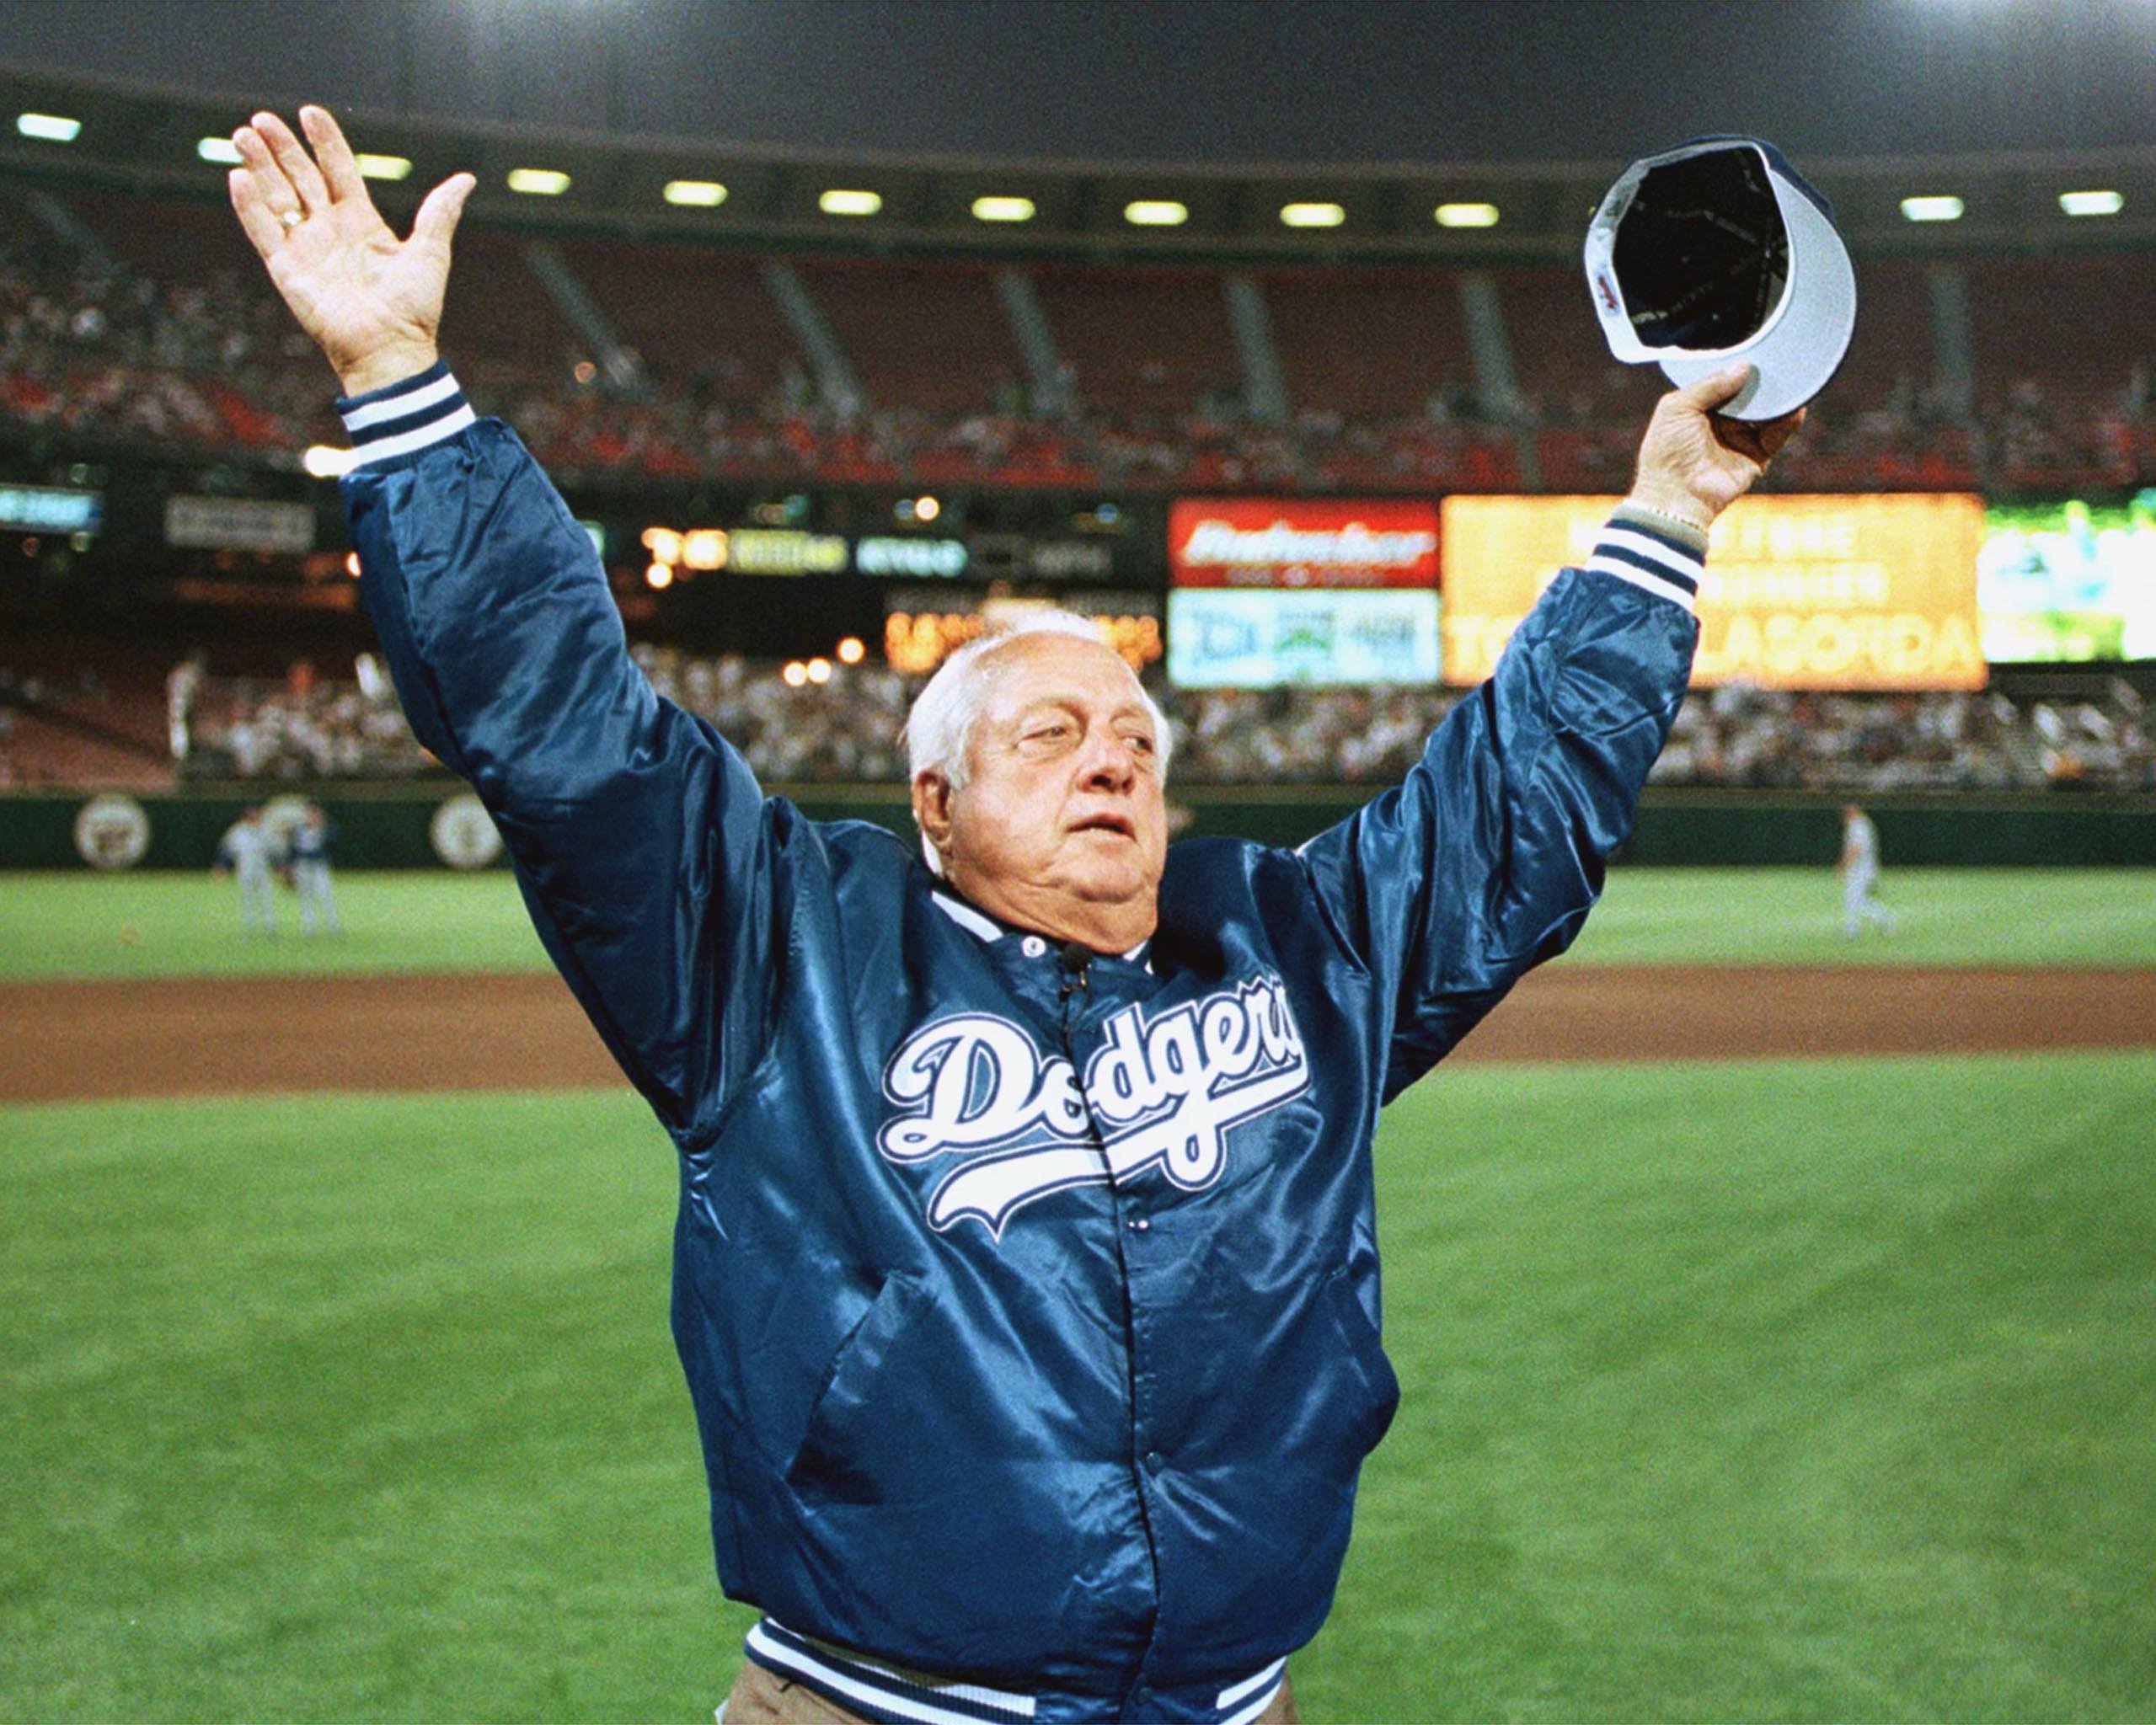 Hall of Fame manager and Dodgers legend, Tommy Lasorda, dies at